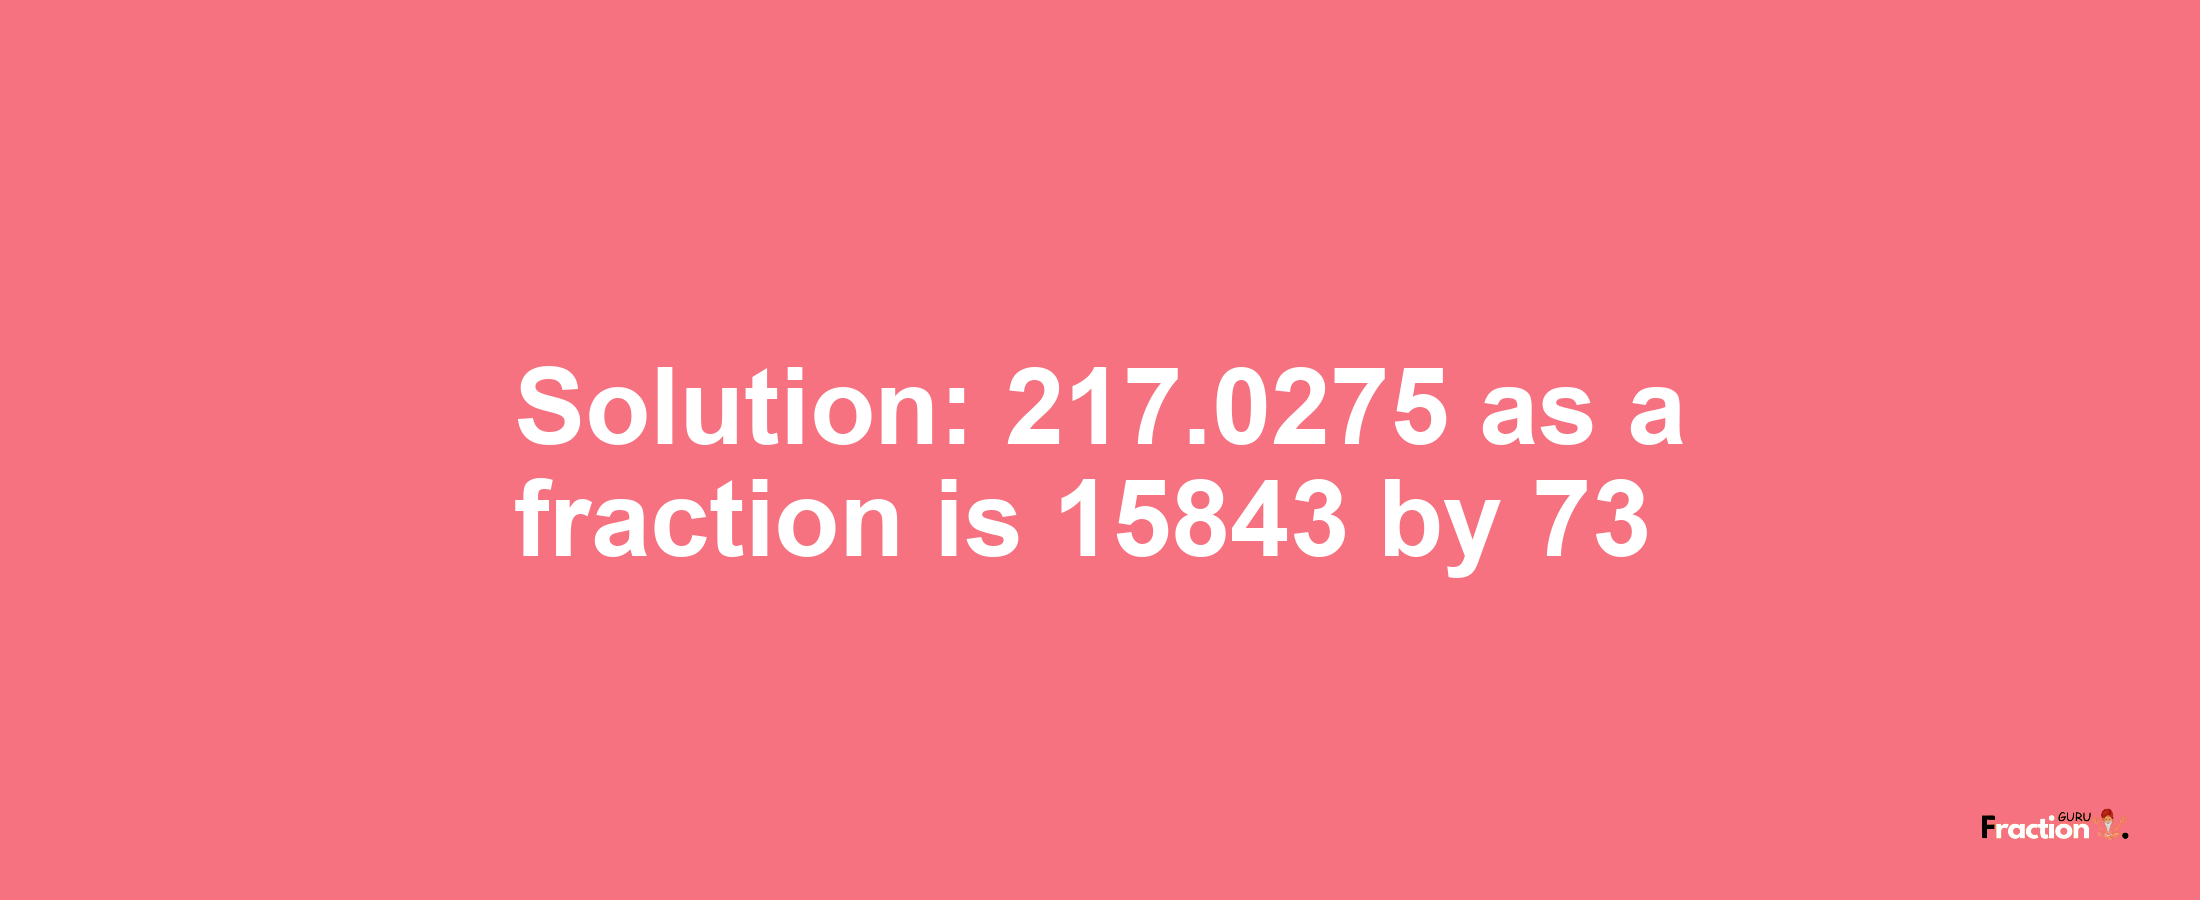 Solution:217.0275 as a fraction is 15843/73